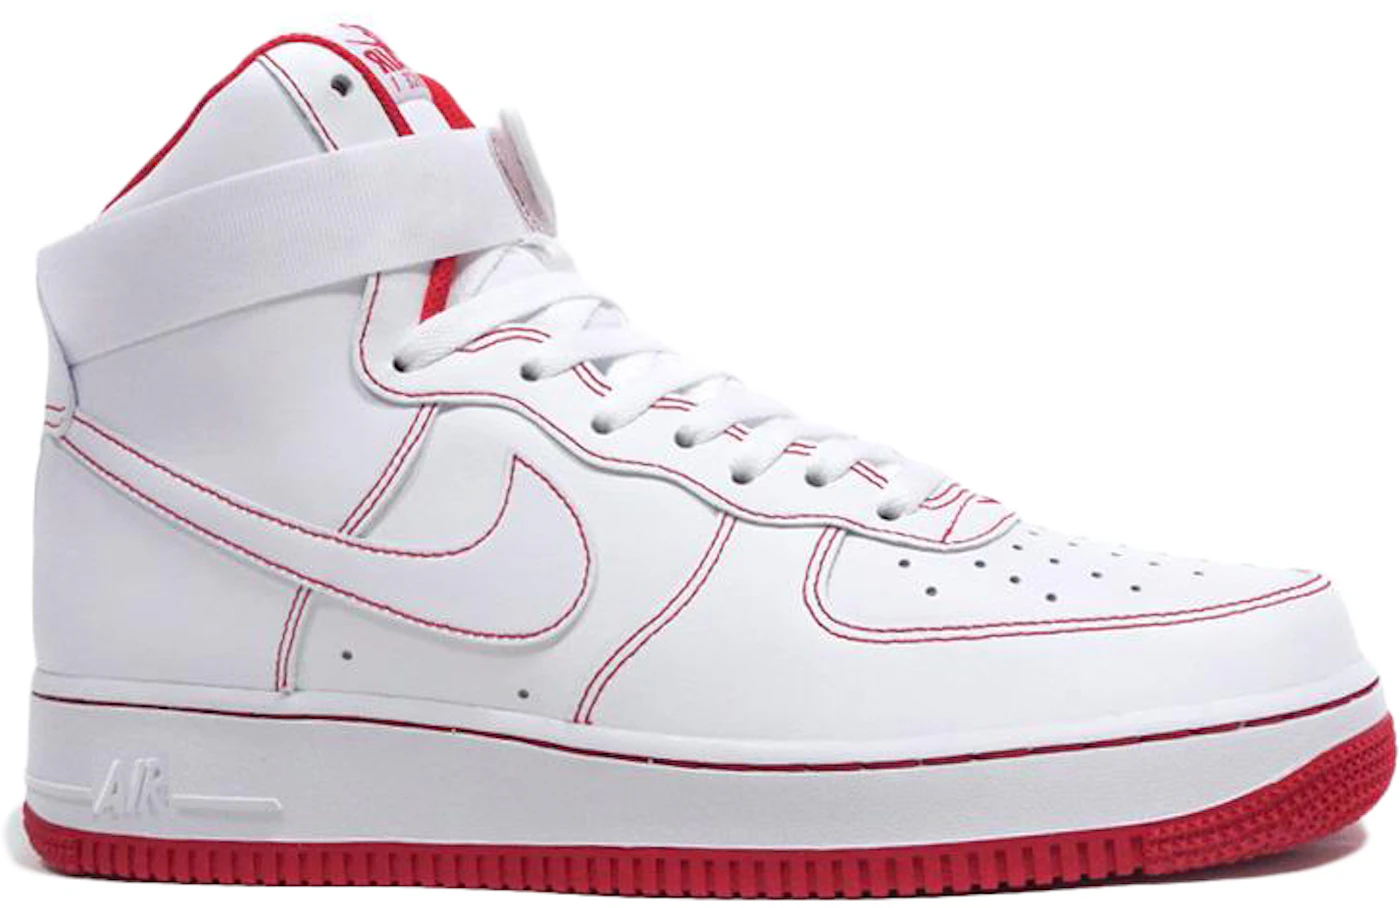 Nike Air Force 1 High By You 'University Red White Black' Men's 8.5  [DZ3635-900]